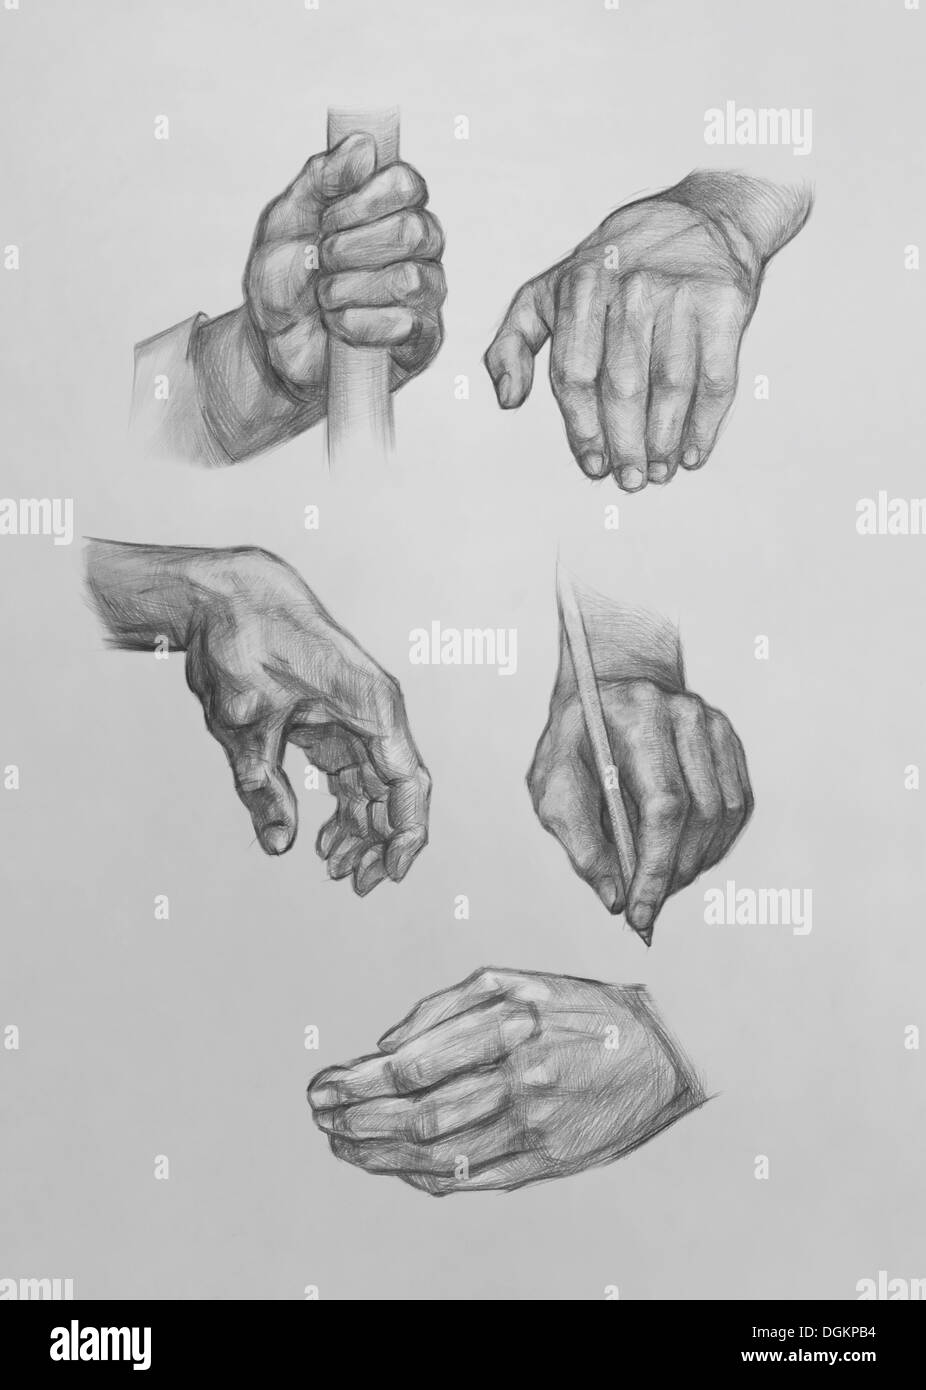 Show of Hands. It is a Pencil Drawing Stock Photo